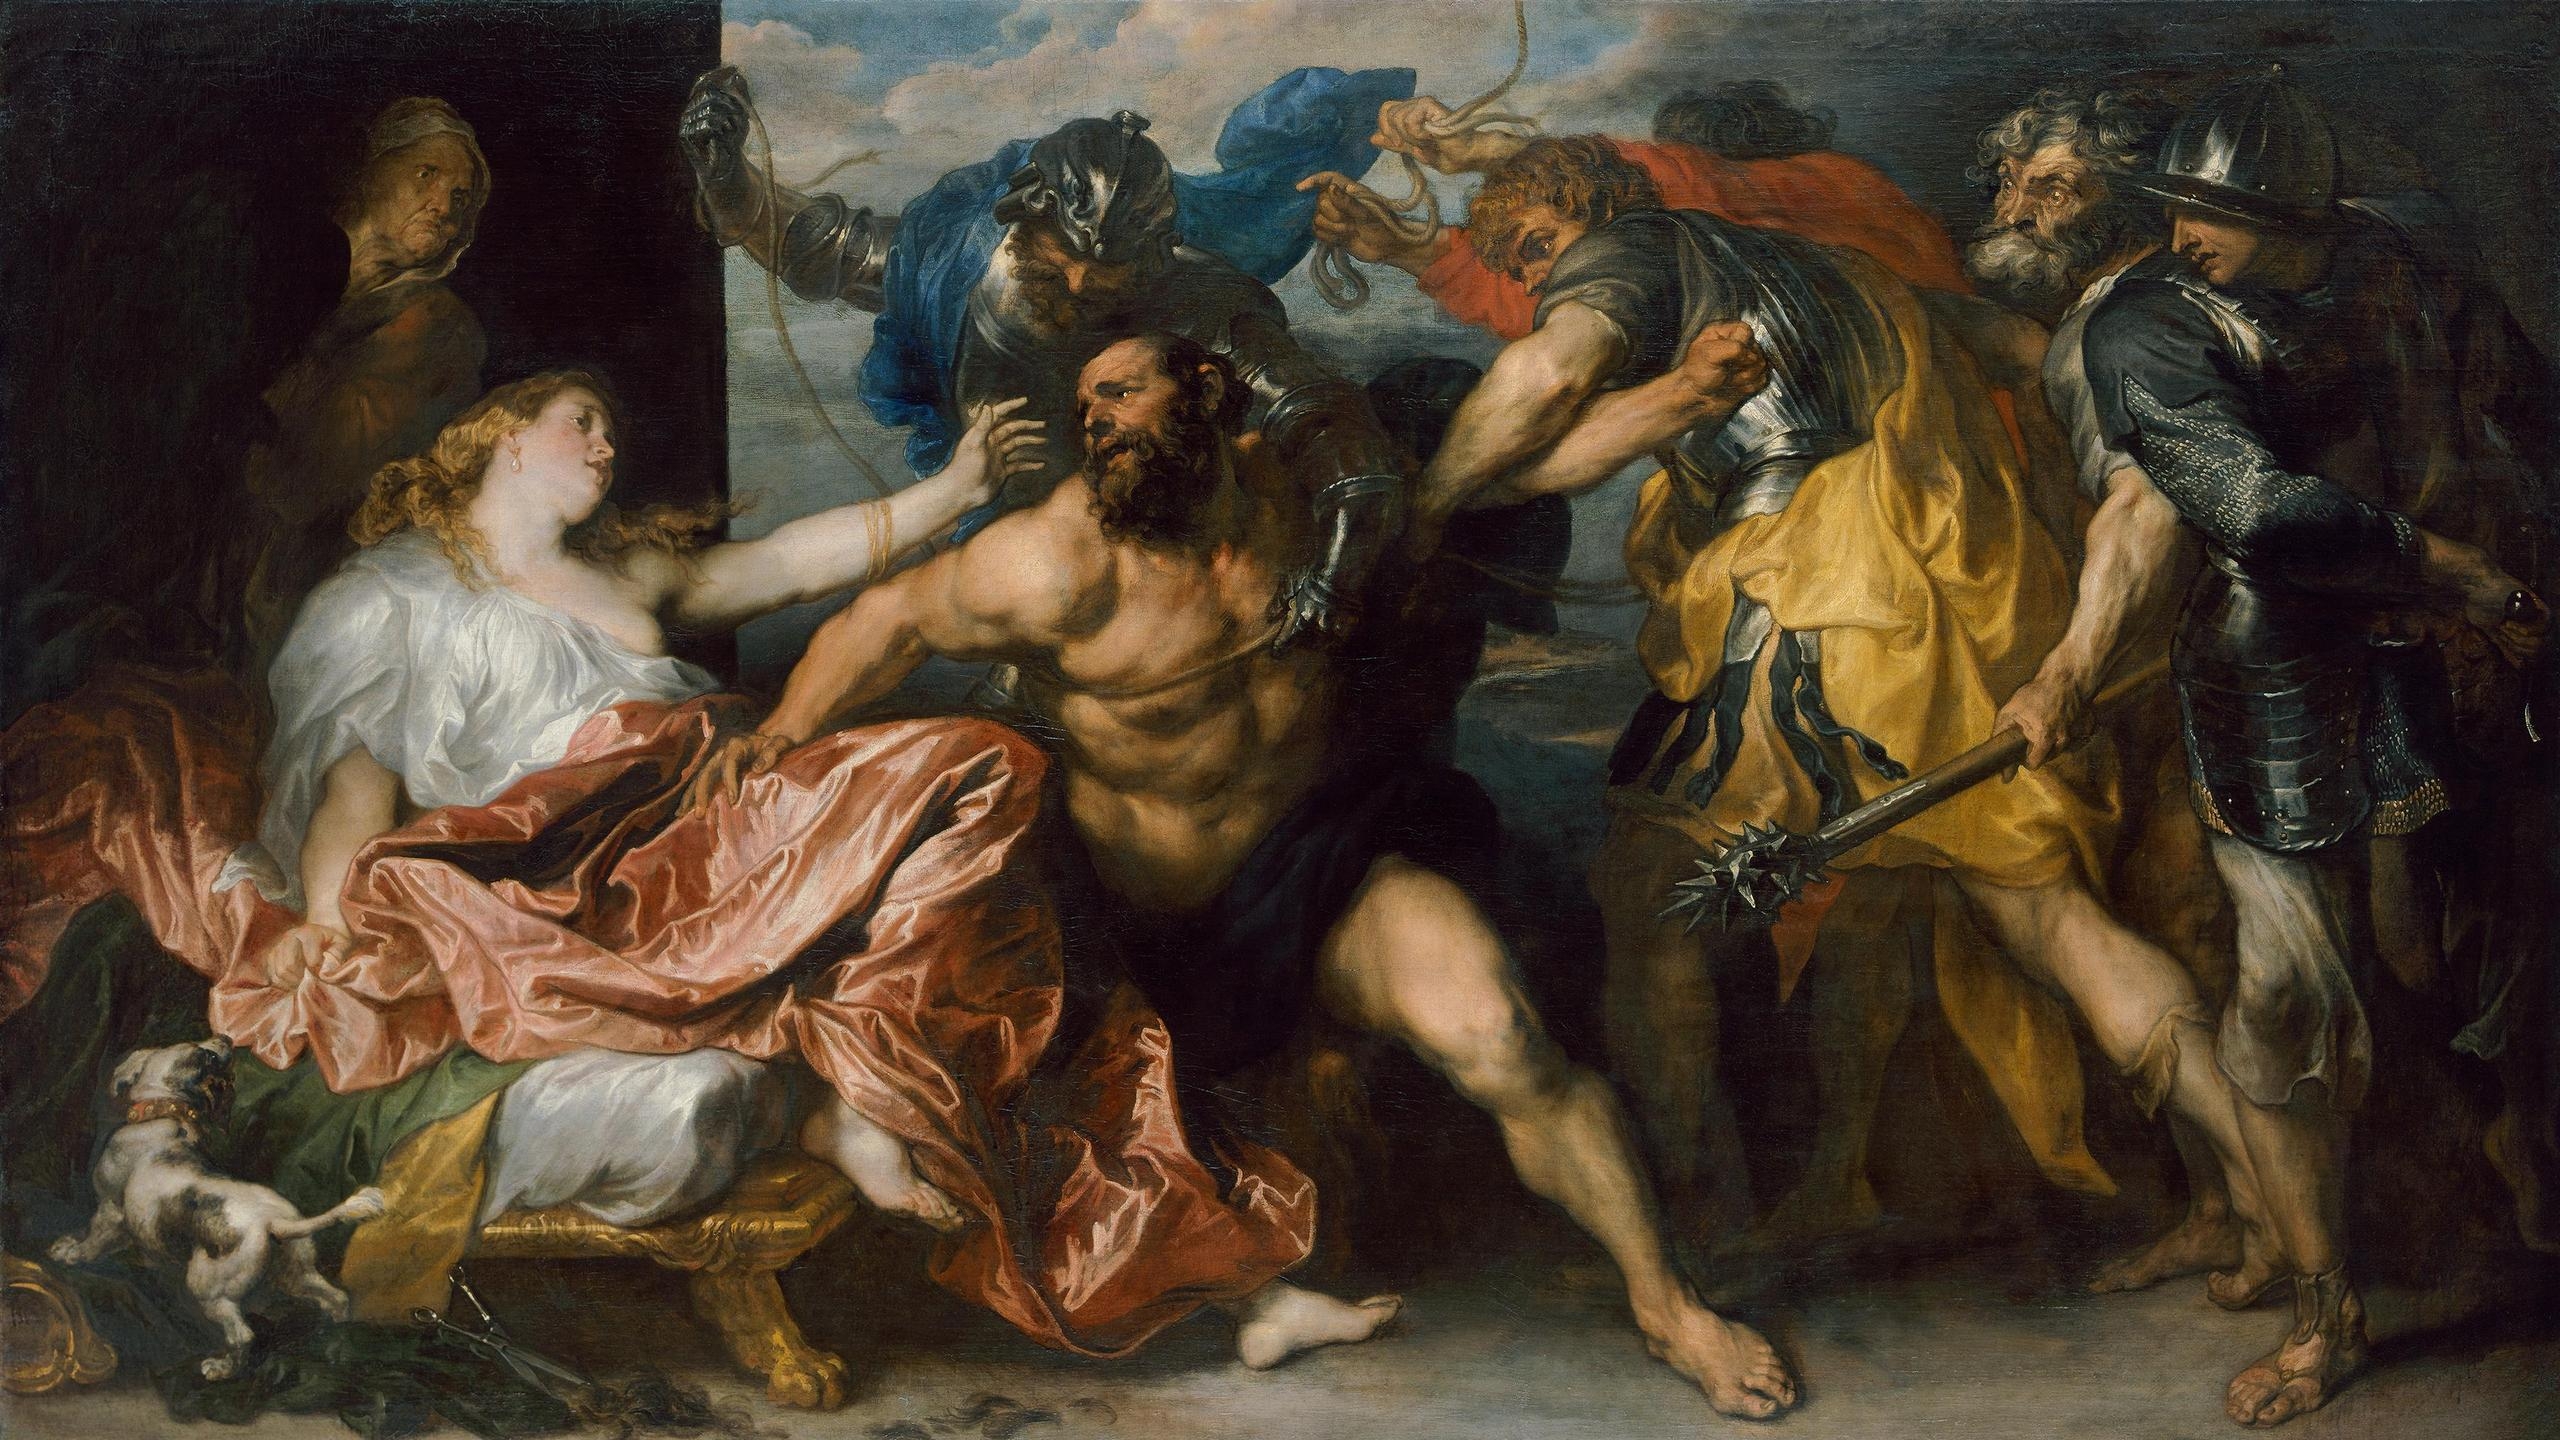 The Taking of Samson Painting for 2560x1440 HDTV resolution